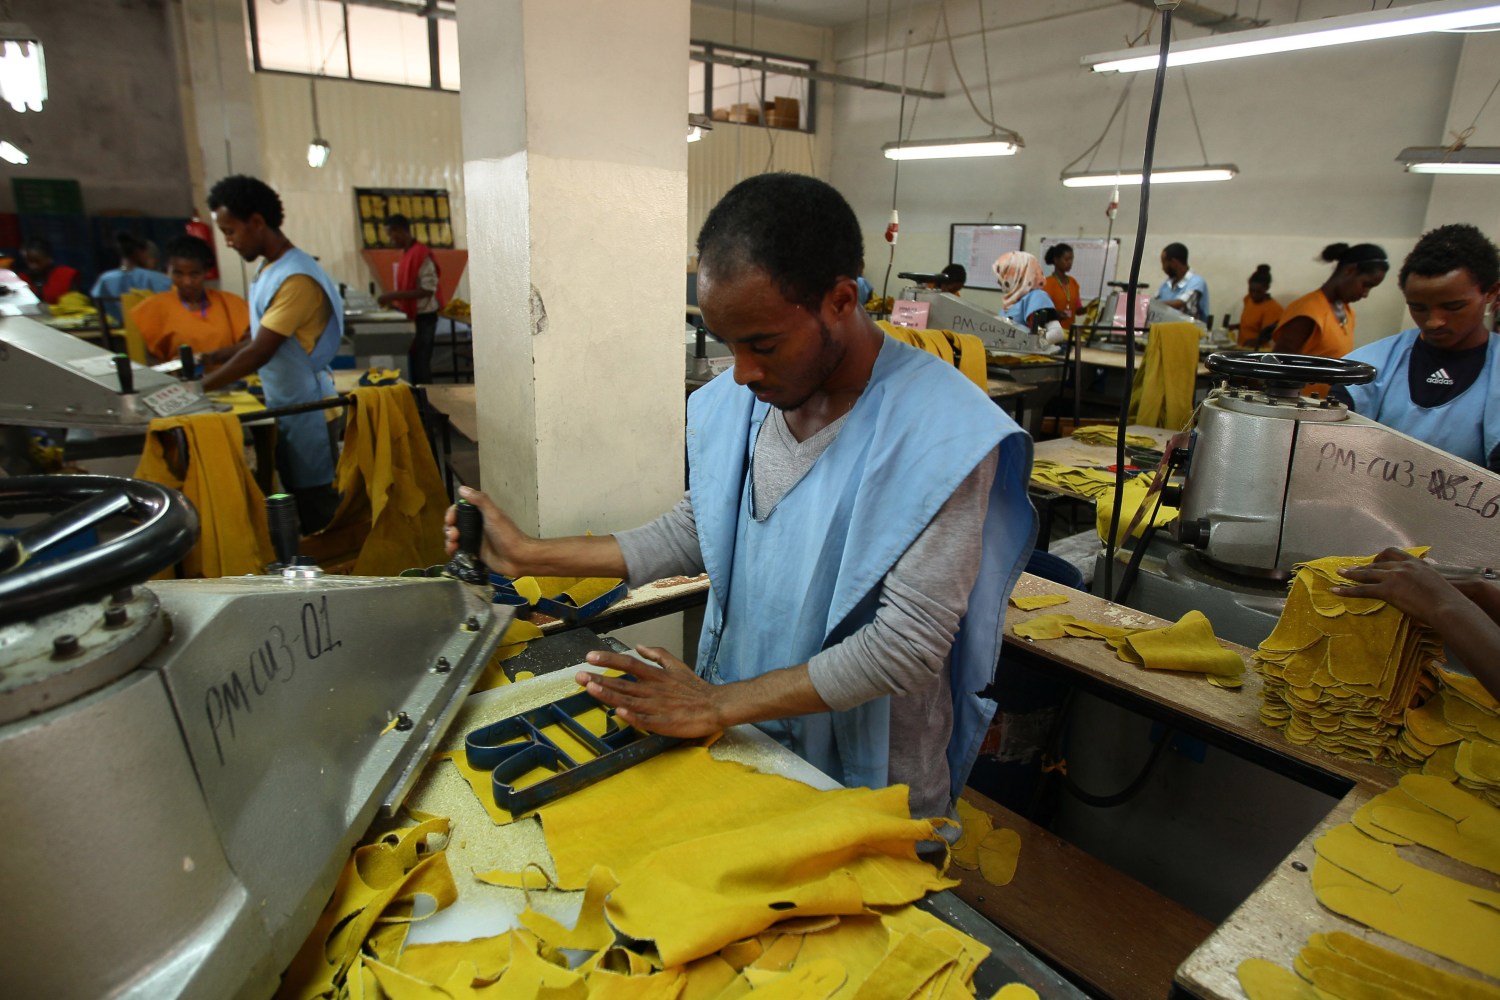 A man designs a leather in Pittards world class leather manufacturing company in Ethiopia's capital Addis Ababa, March 22, 2016. Picture taken March 22, 2016. REUTERS/Tiksa Negeri  - D1AESWKUKPAA